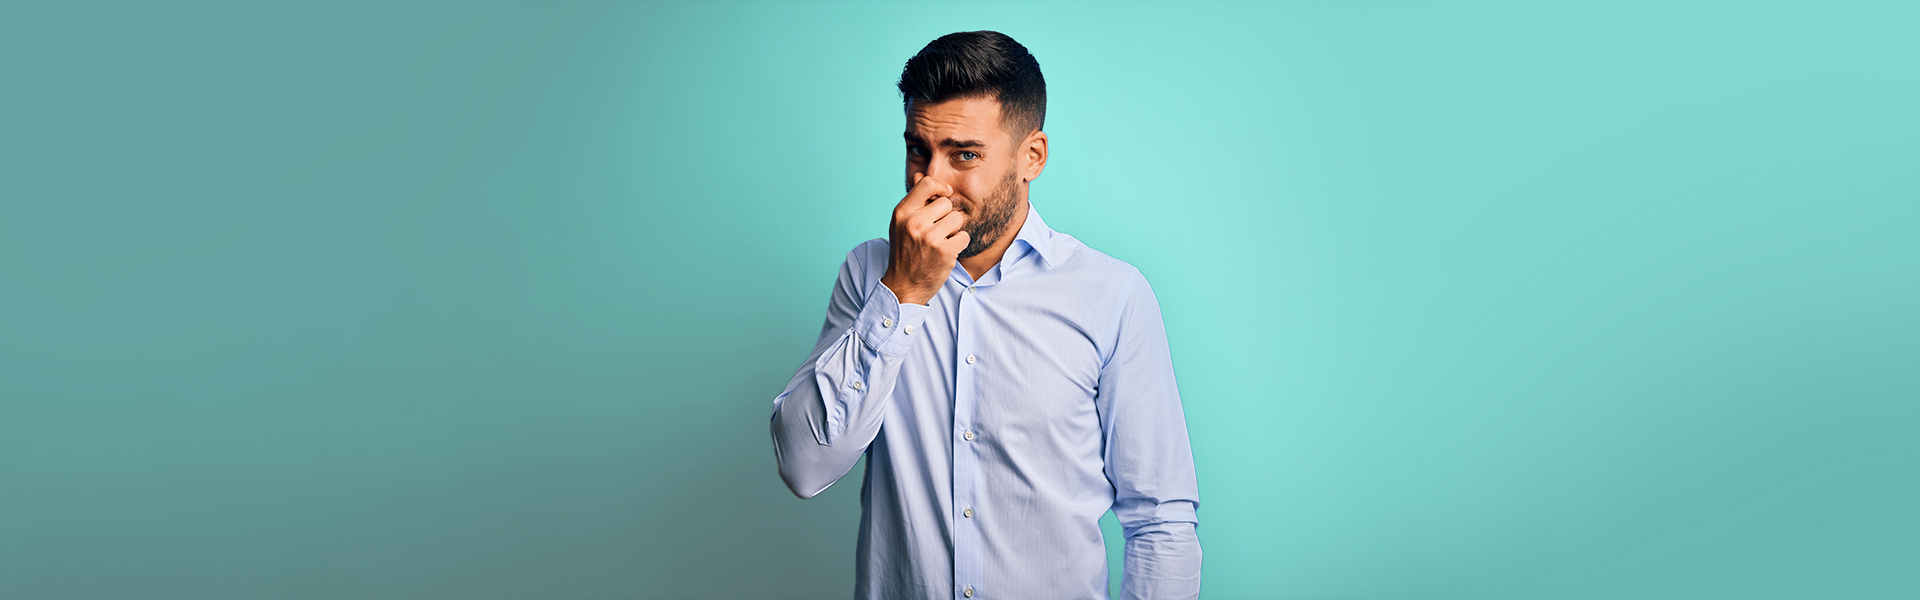 Bad Breath Should Cause Embarrassment and Not Dental Anxiety When Seeking Treatment